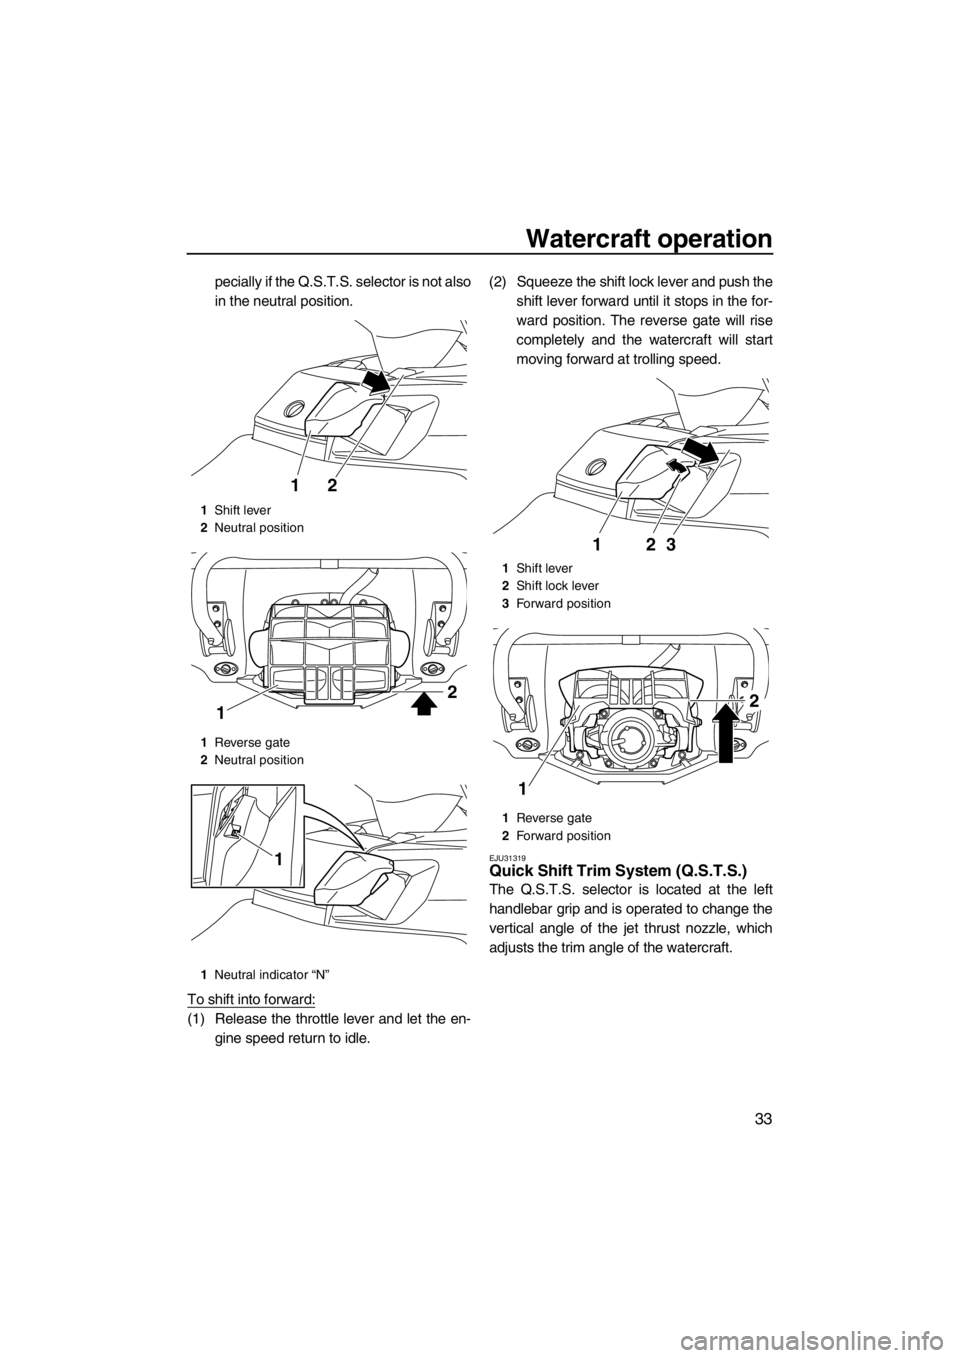 YAMAHA FX SHO 2012 Owners Guide Watercraft operation
33
pecially if the Q.S.T.S. selector is not also
in the neutral position.
To shift into forward:
(1) Release the throttle lever and let the en-
gine speed return to idle.(2) Squee